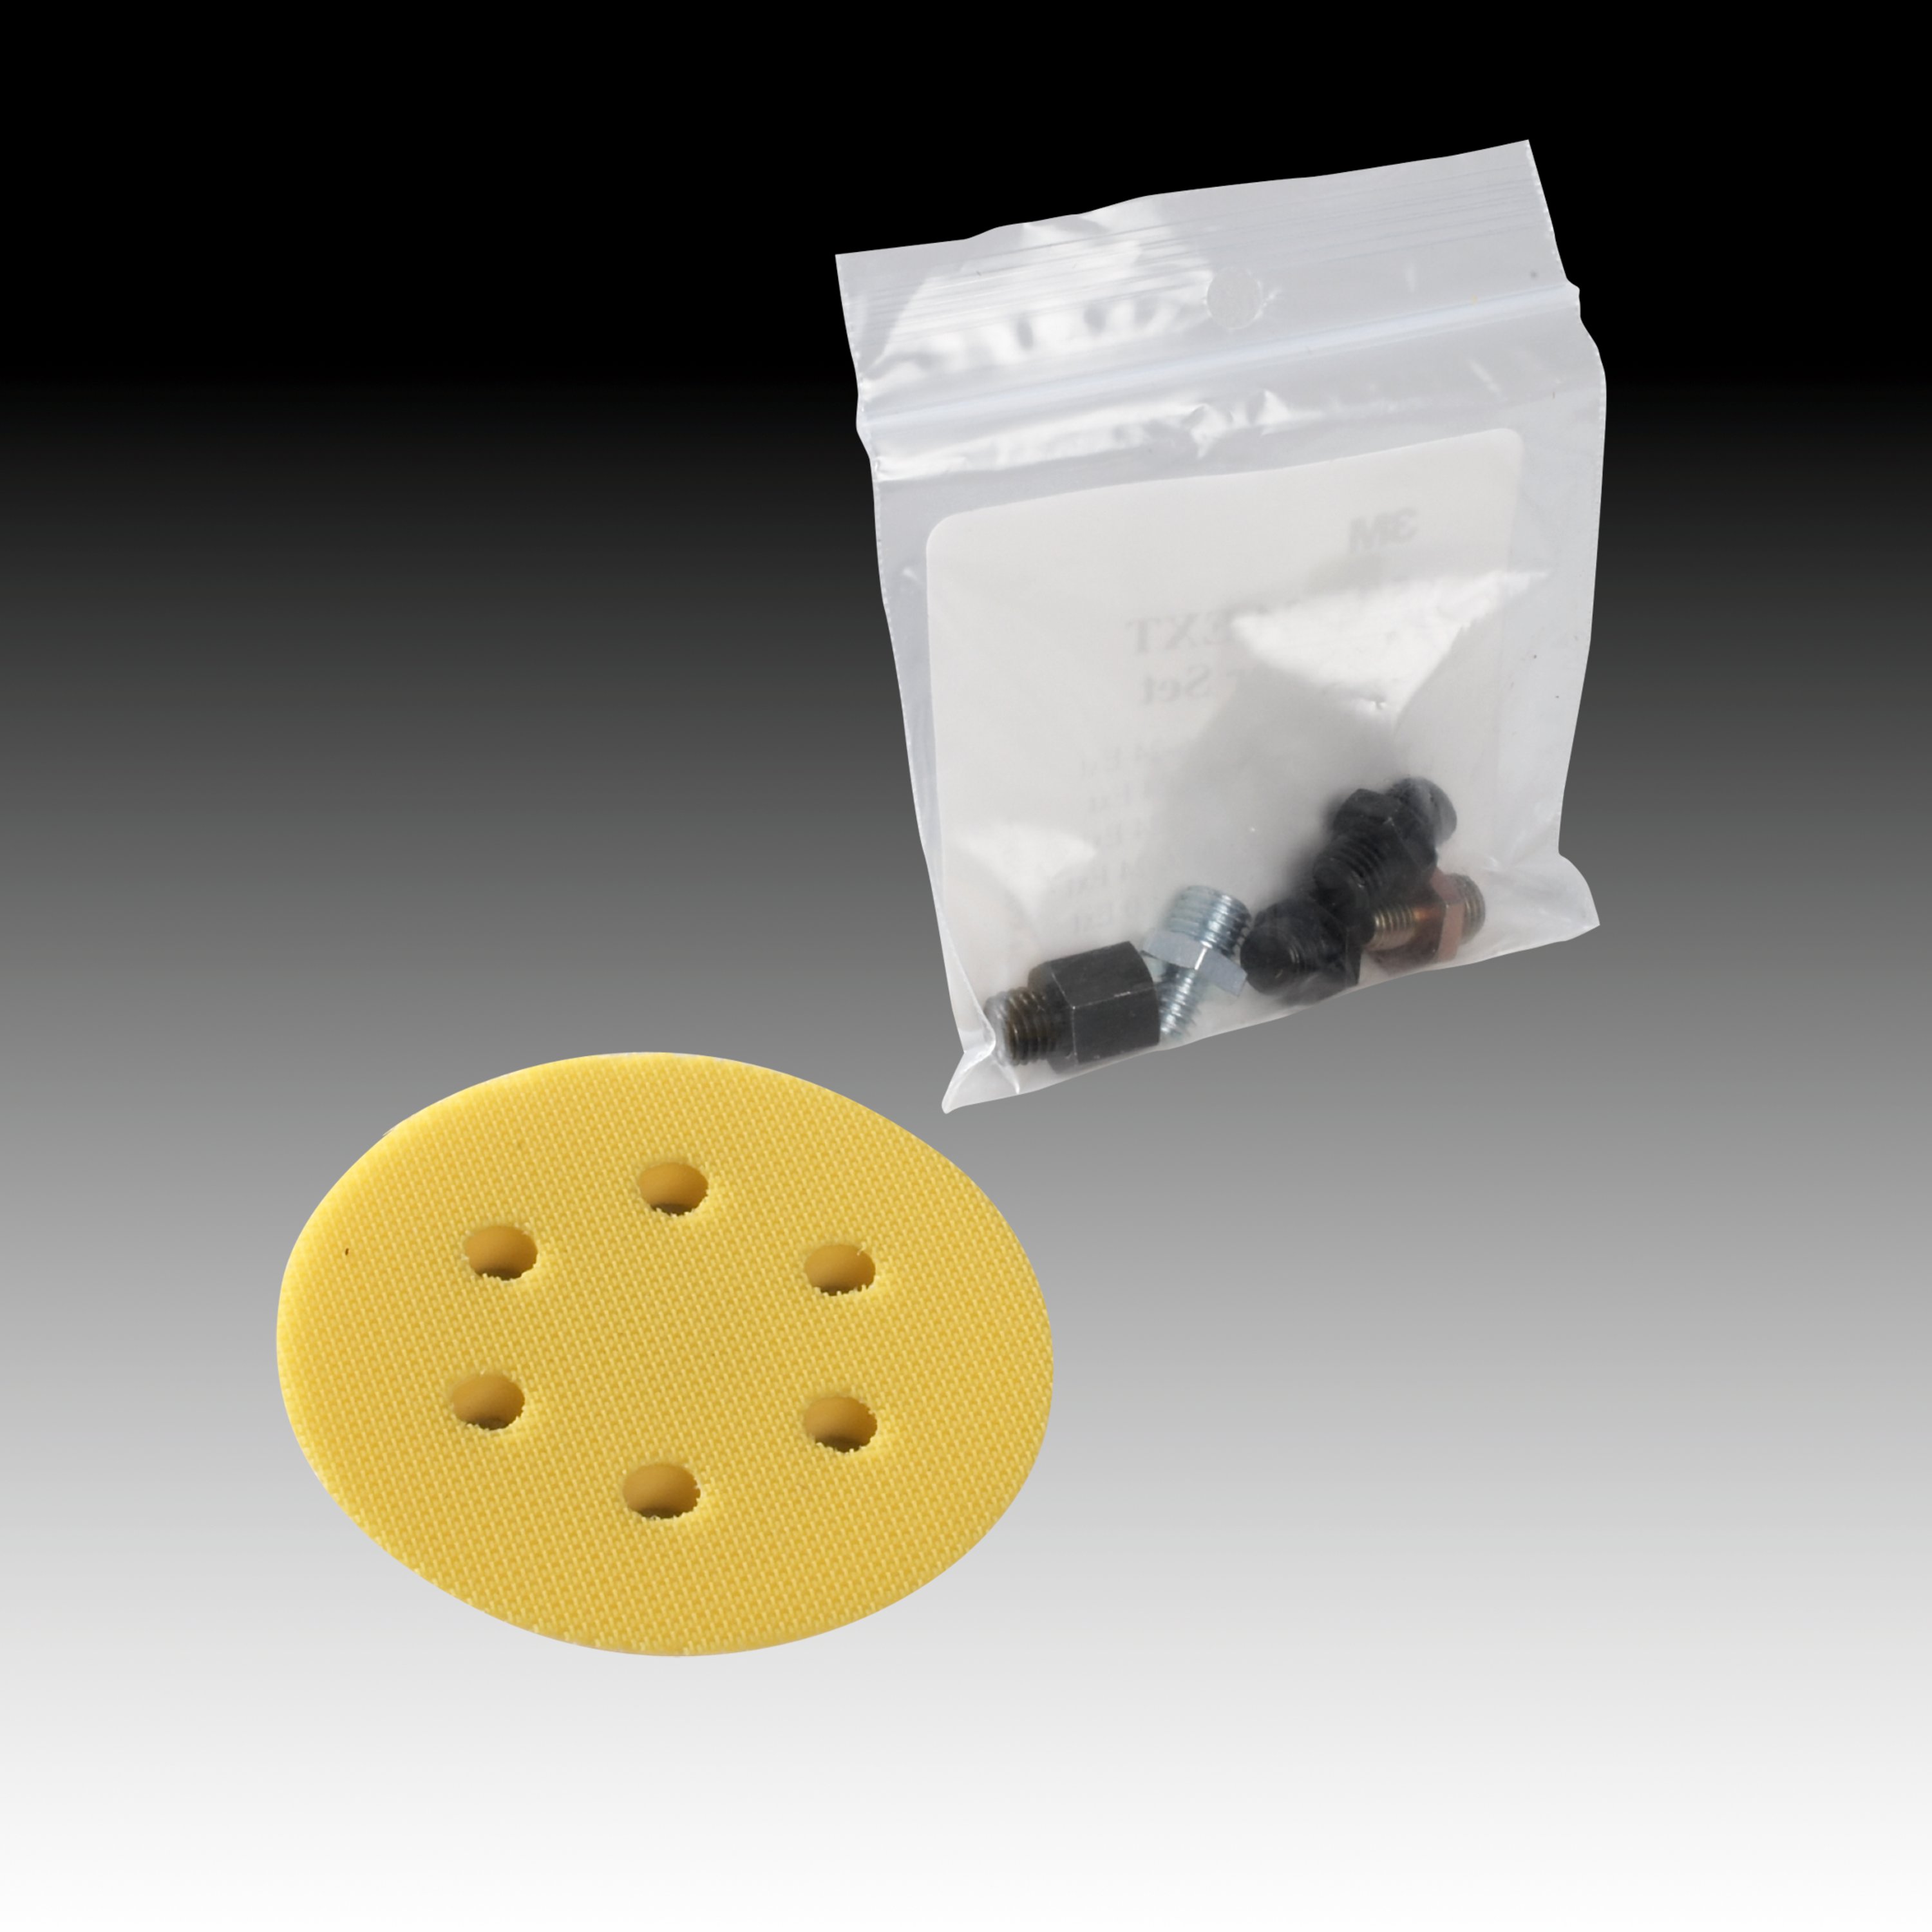 Clean Sanding products allow the vacuum to suction dust from the air and off of the workpiece.